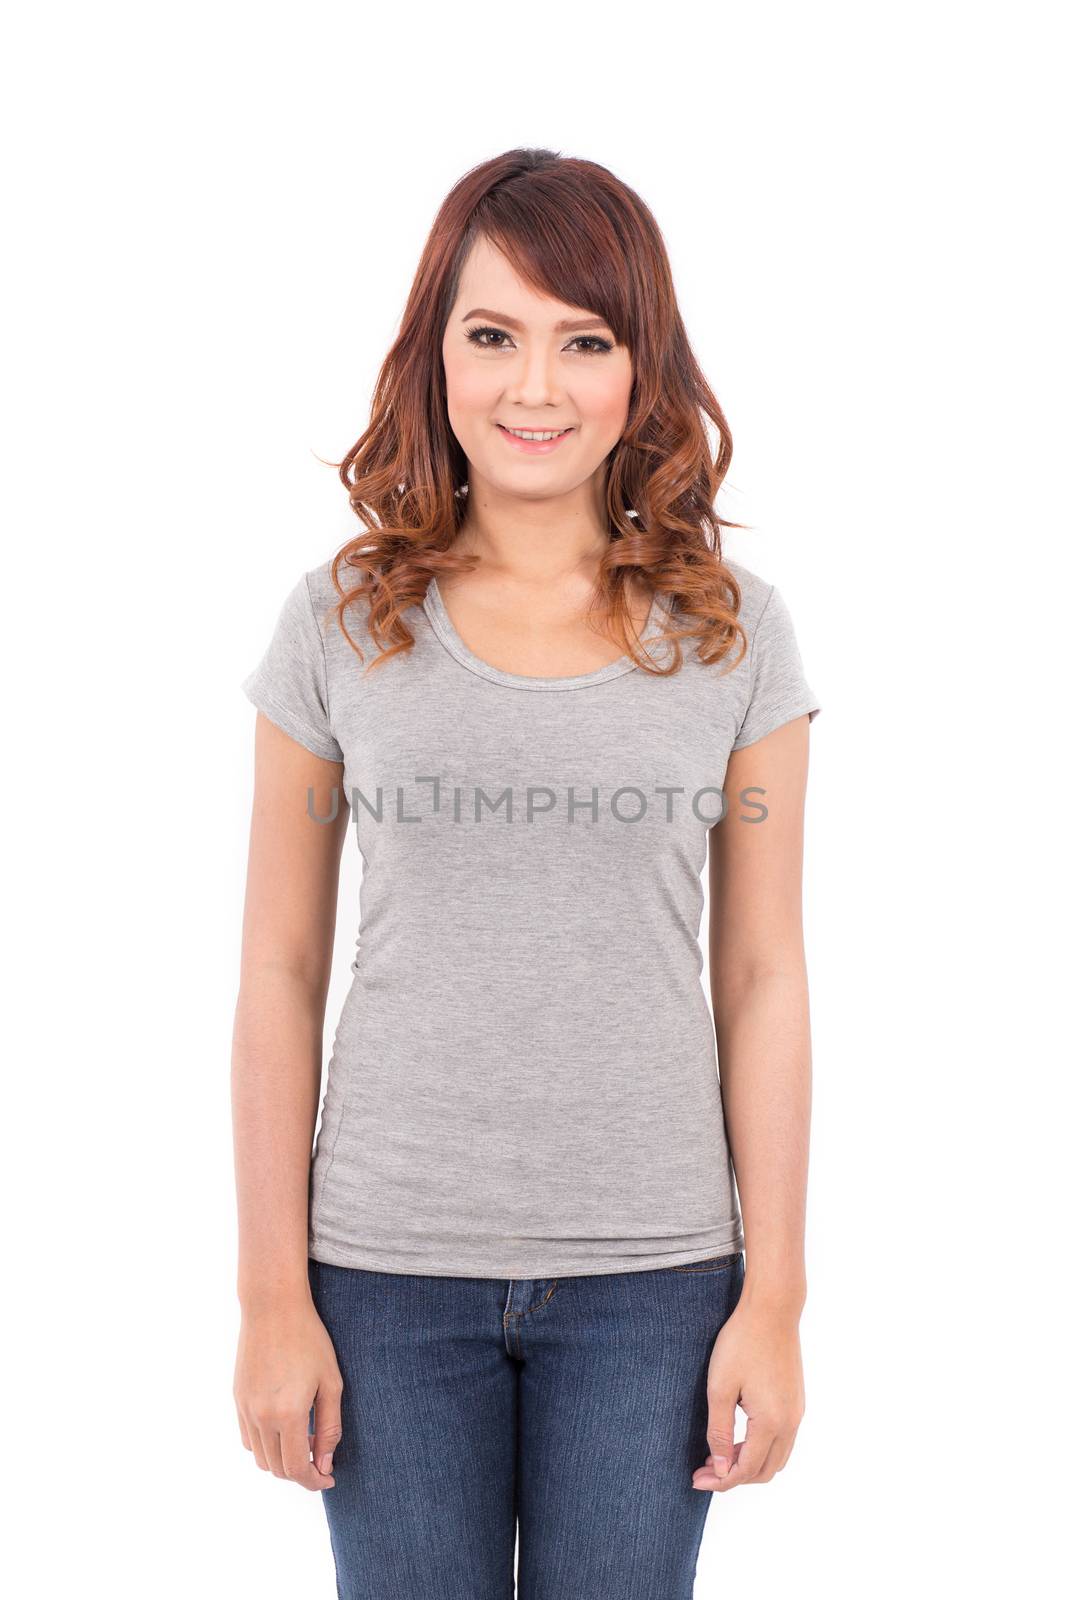 happy teenage girl in blank gray t-shirt on white background